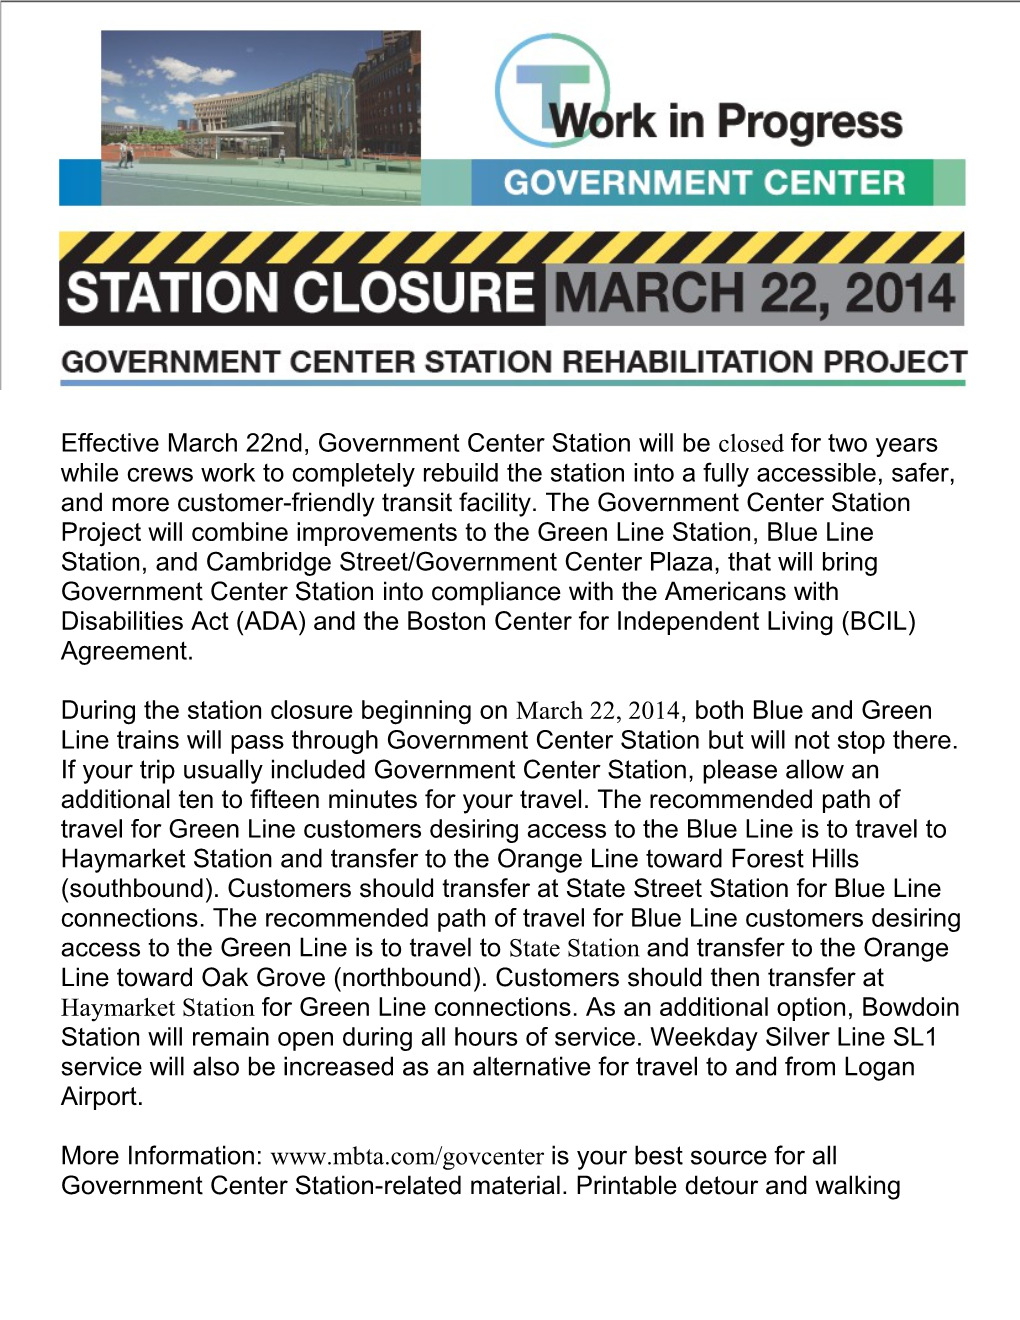 Effective March 22Nd, Government Center Station Will Be Closed for Two Years While Crews